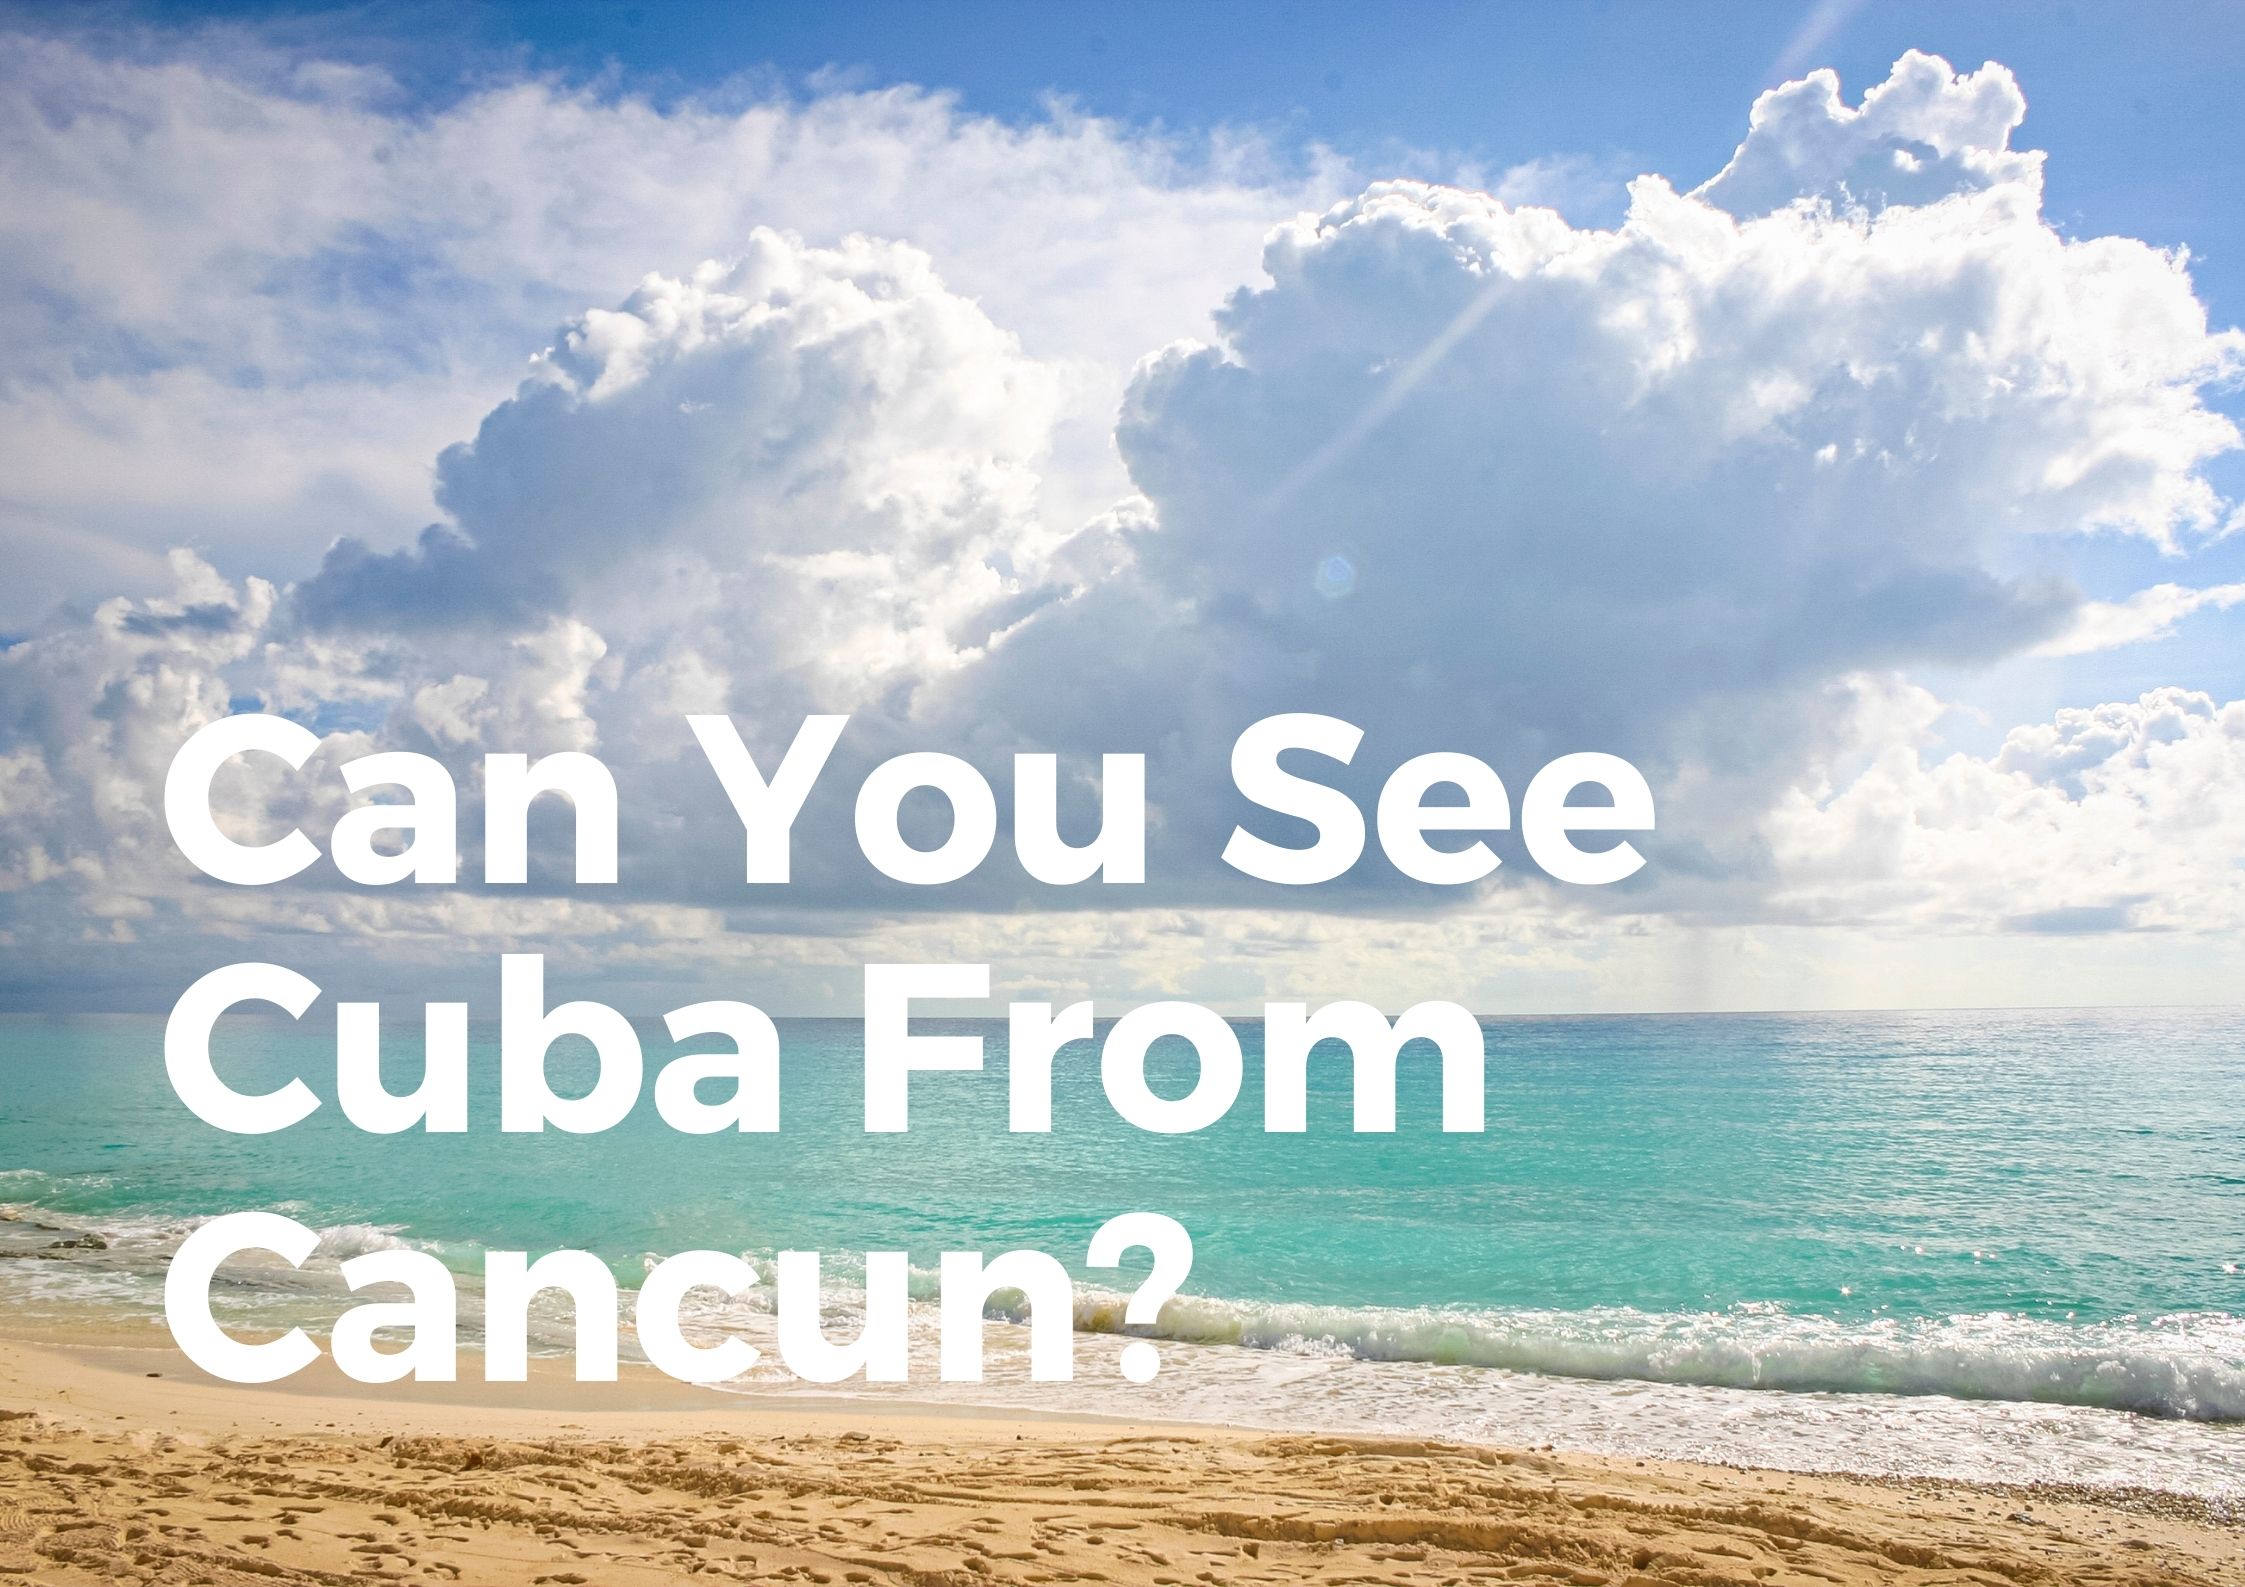 Can you see Cuba from Cancun